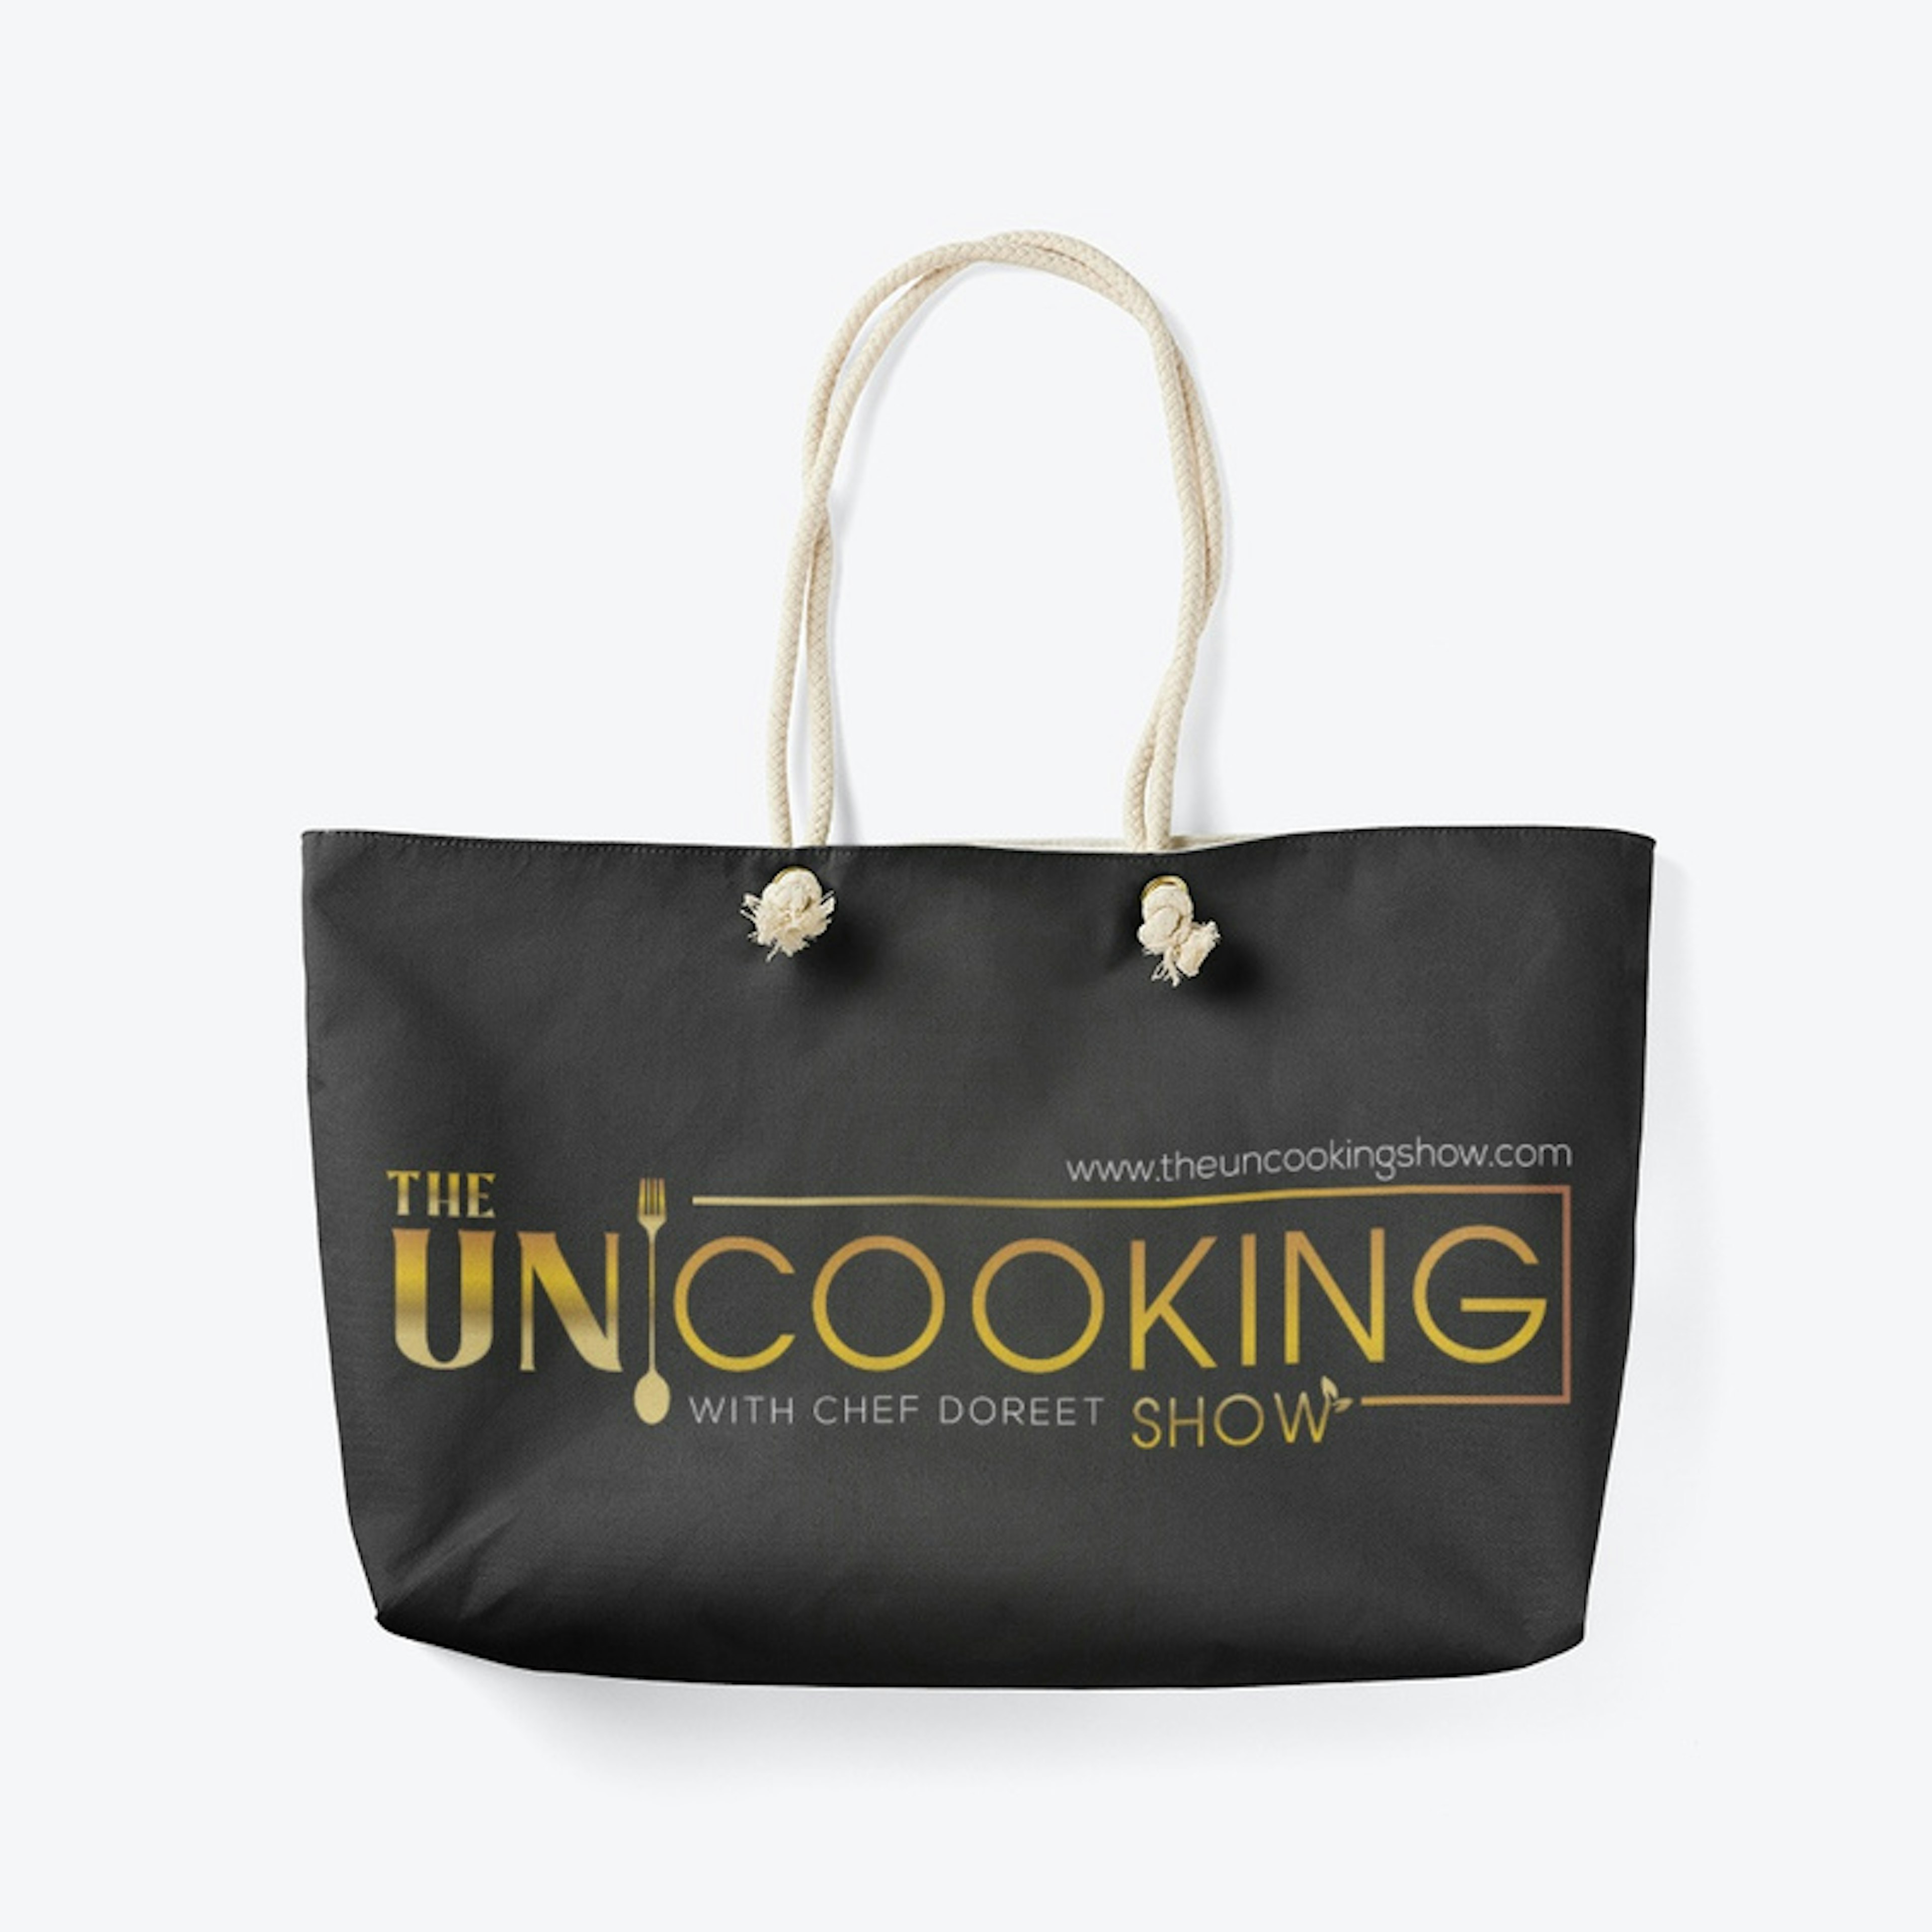 The UNcooking Show Products